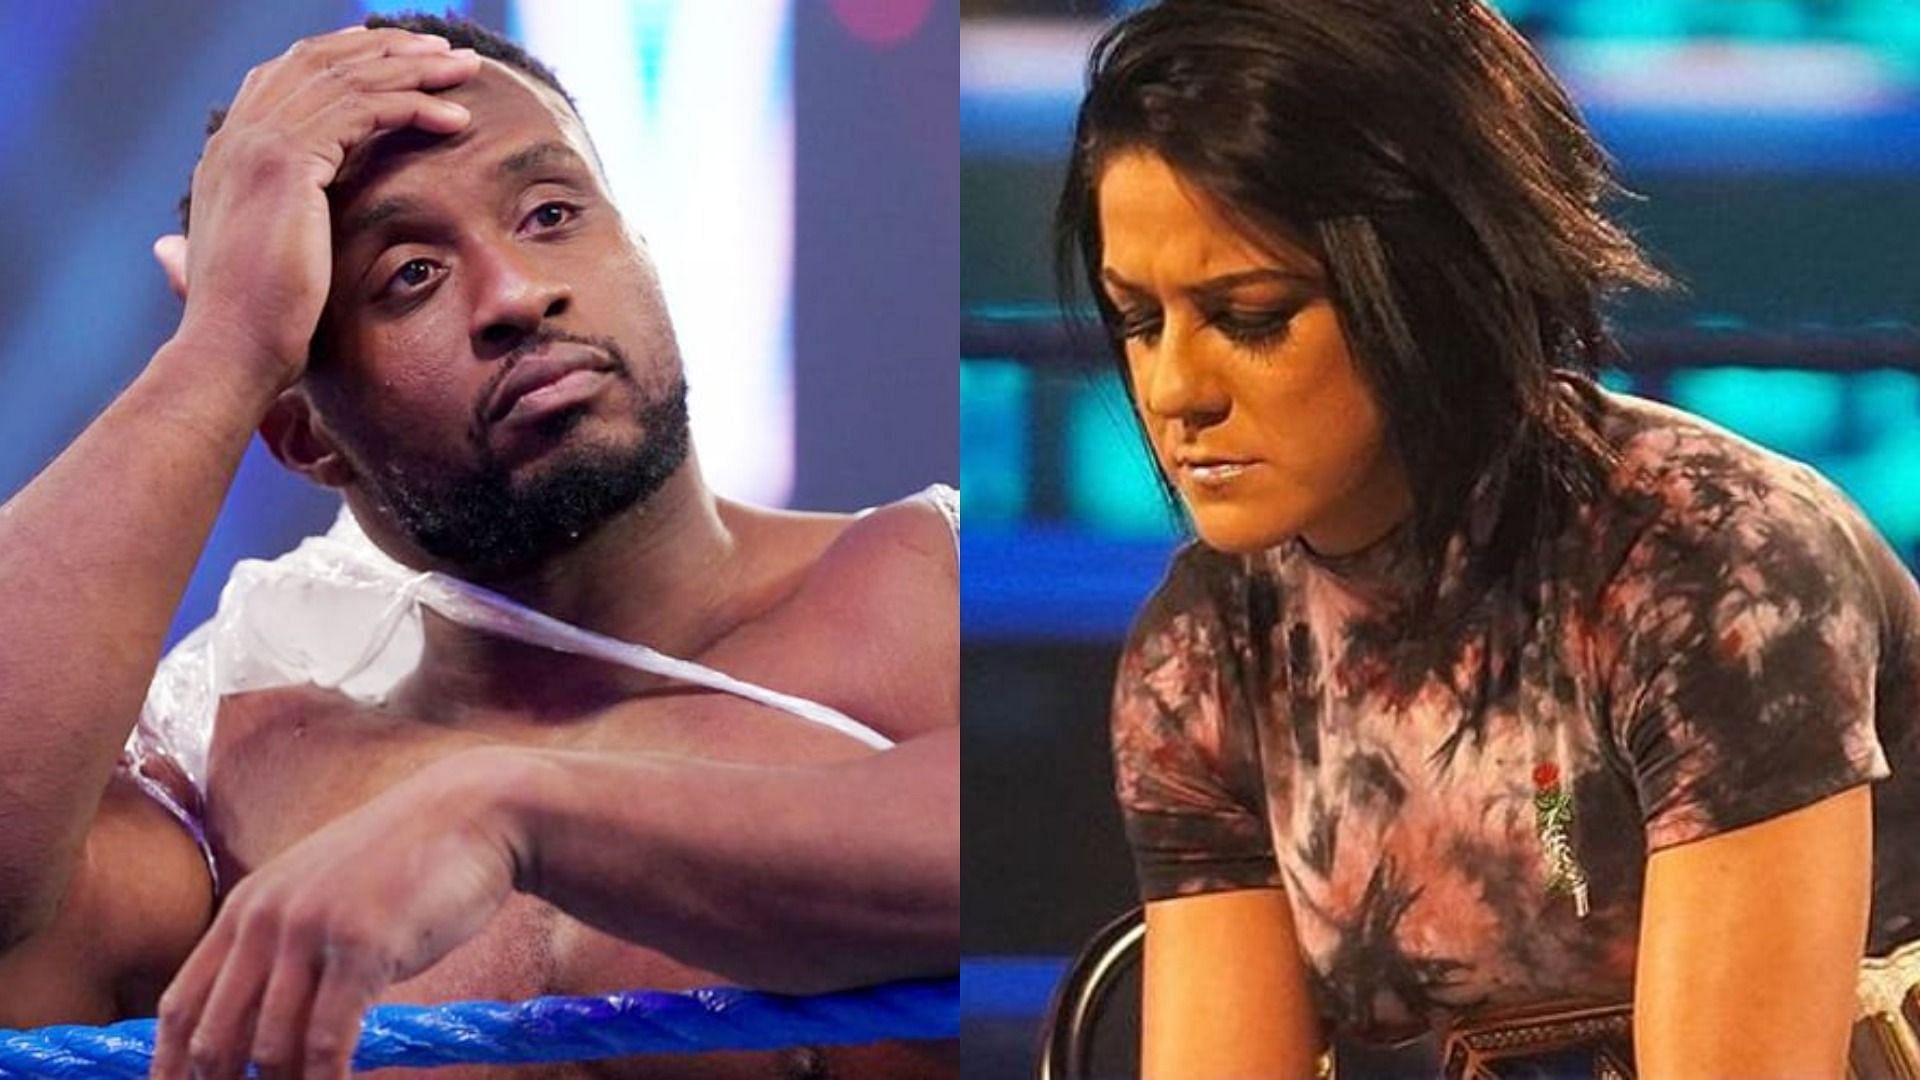 Big E and Bayley are currently on the list of inactive stars.